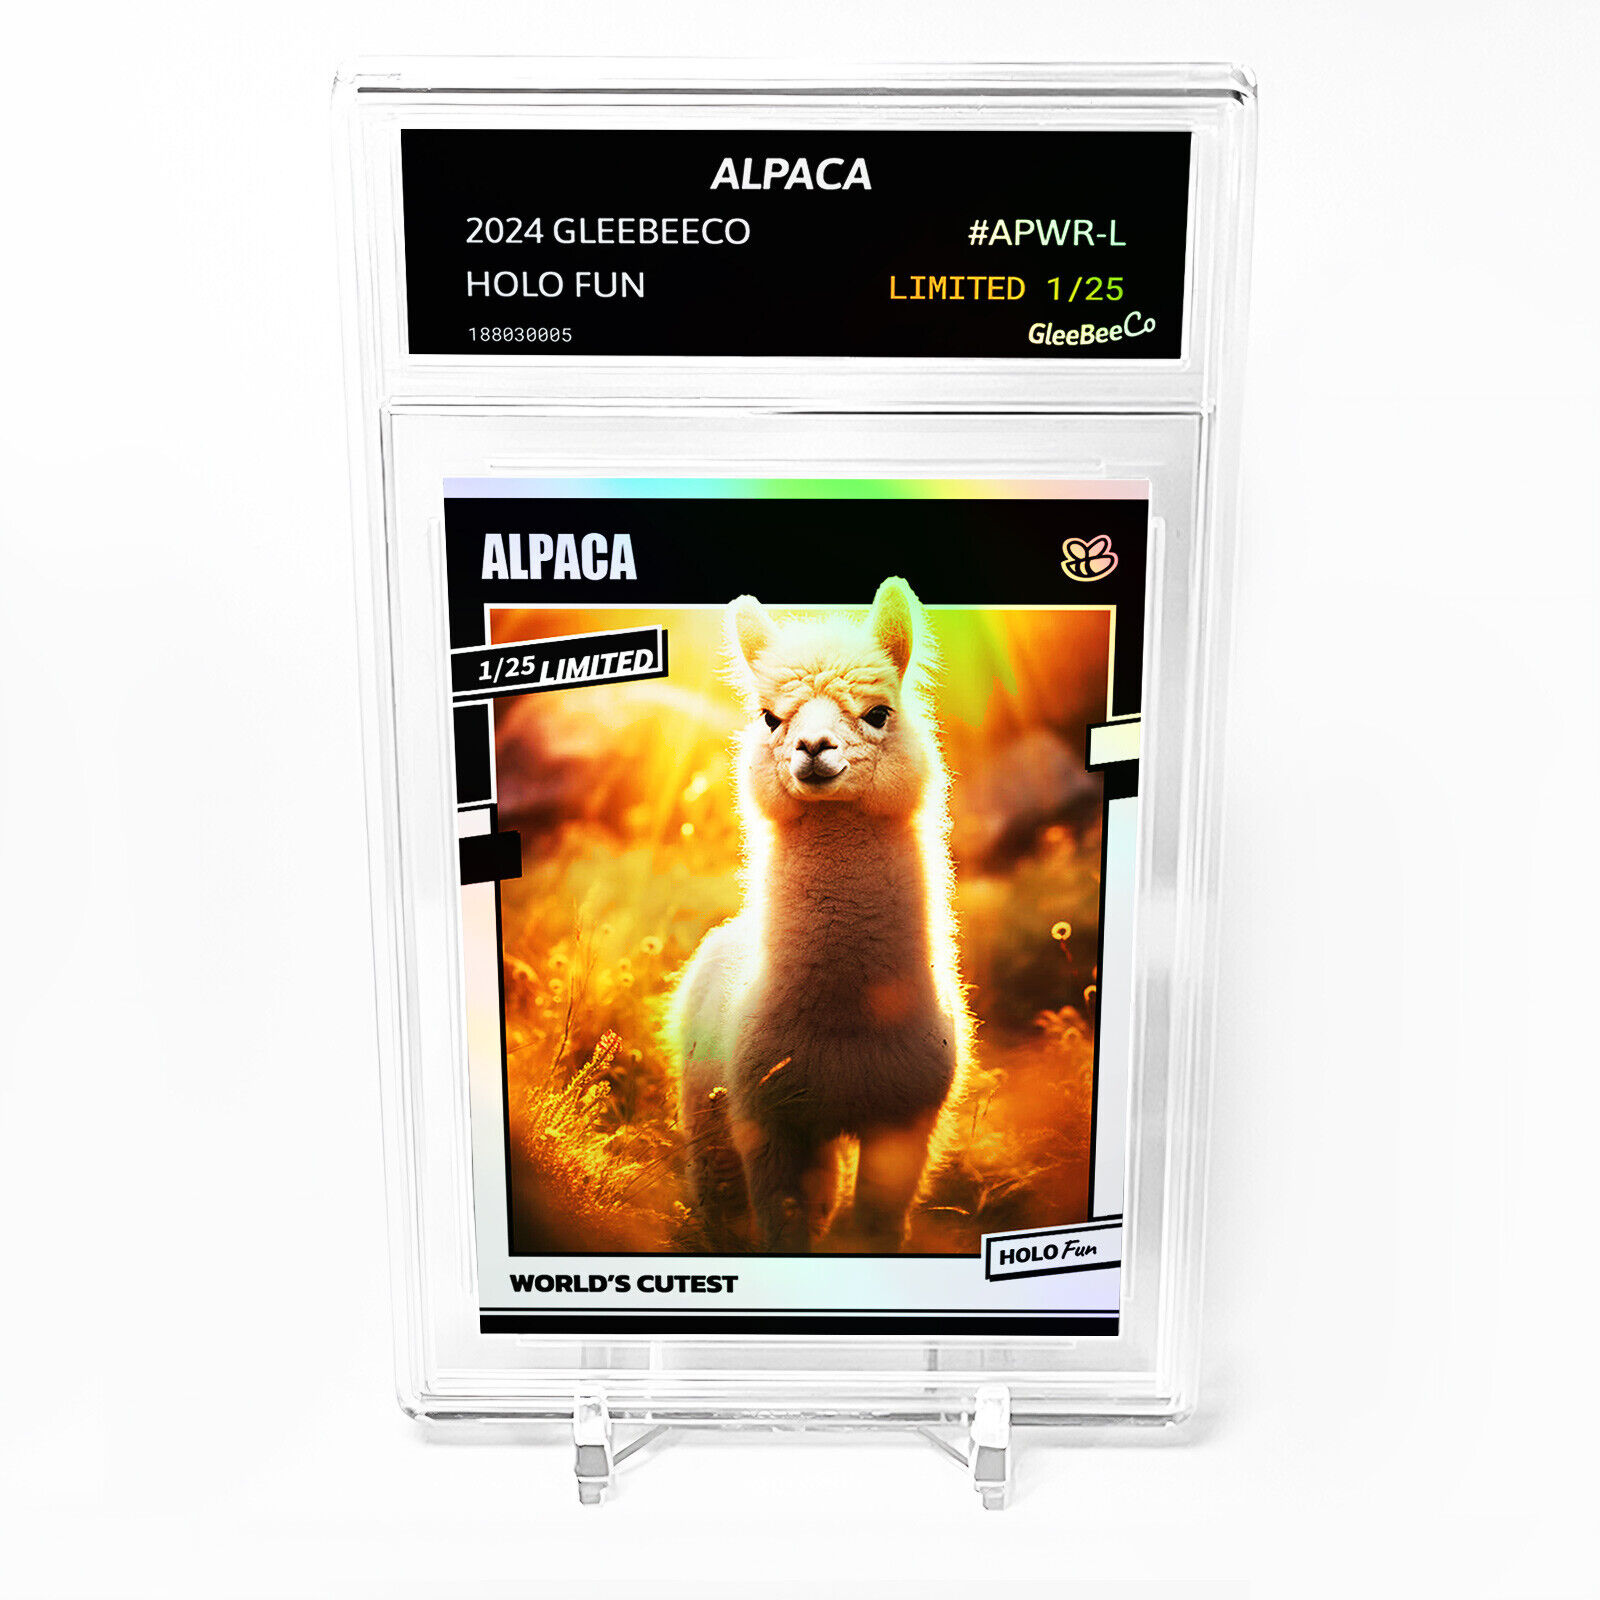 ALPACA Holographic Card 2024 GleeBeeCo World\'s Cutest #APWR-L LIMITED to /25